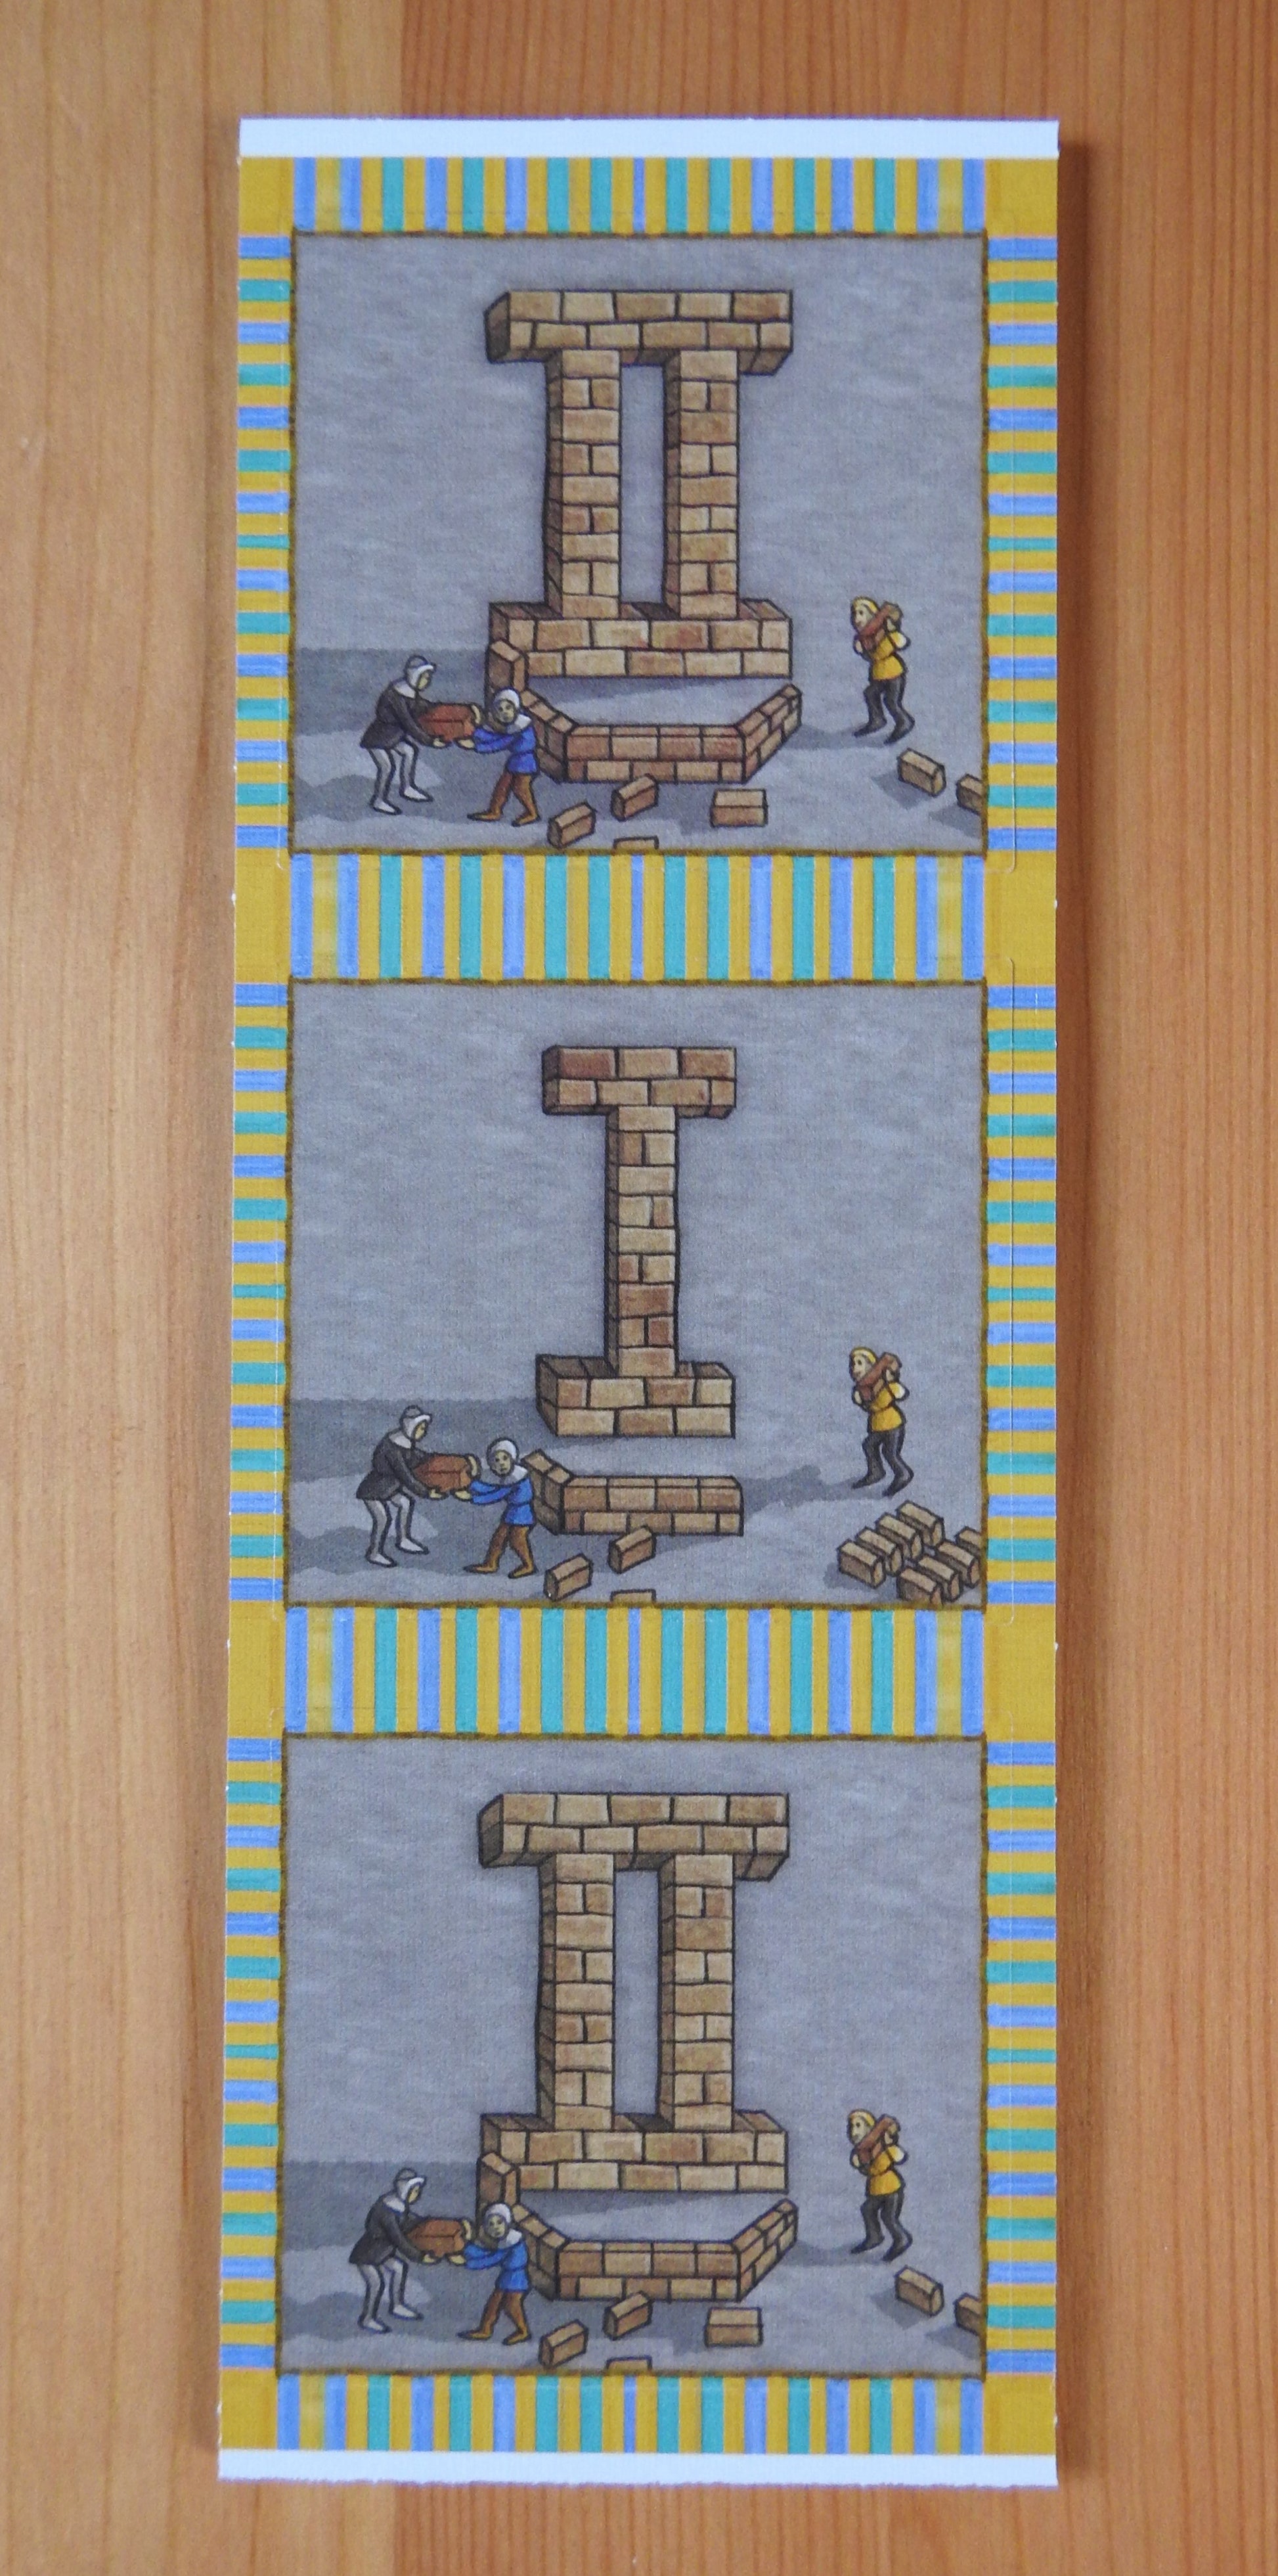 Close-up view of the back of the tiles, with 2 number II tiles and 1 number I tile.